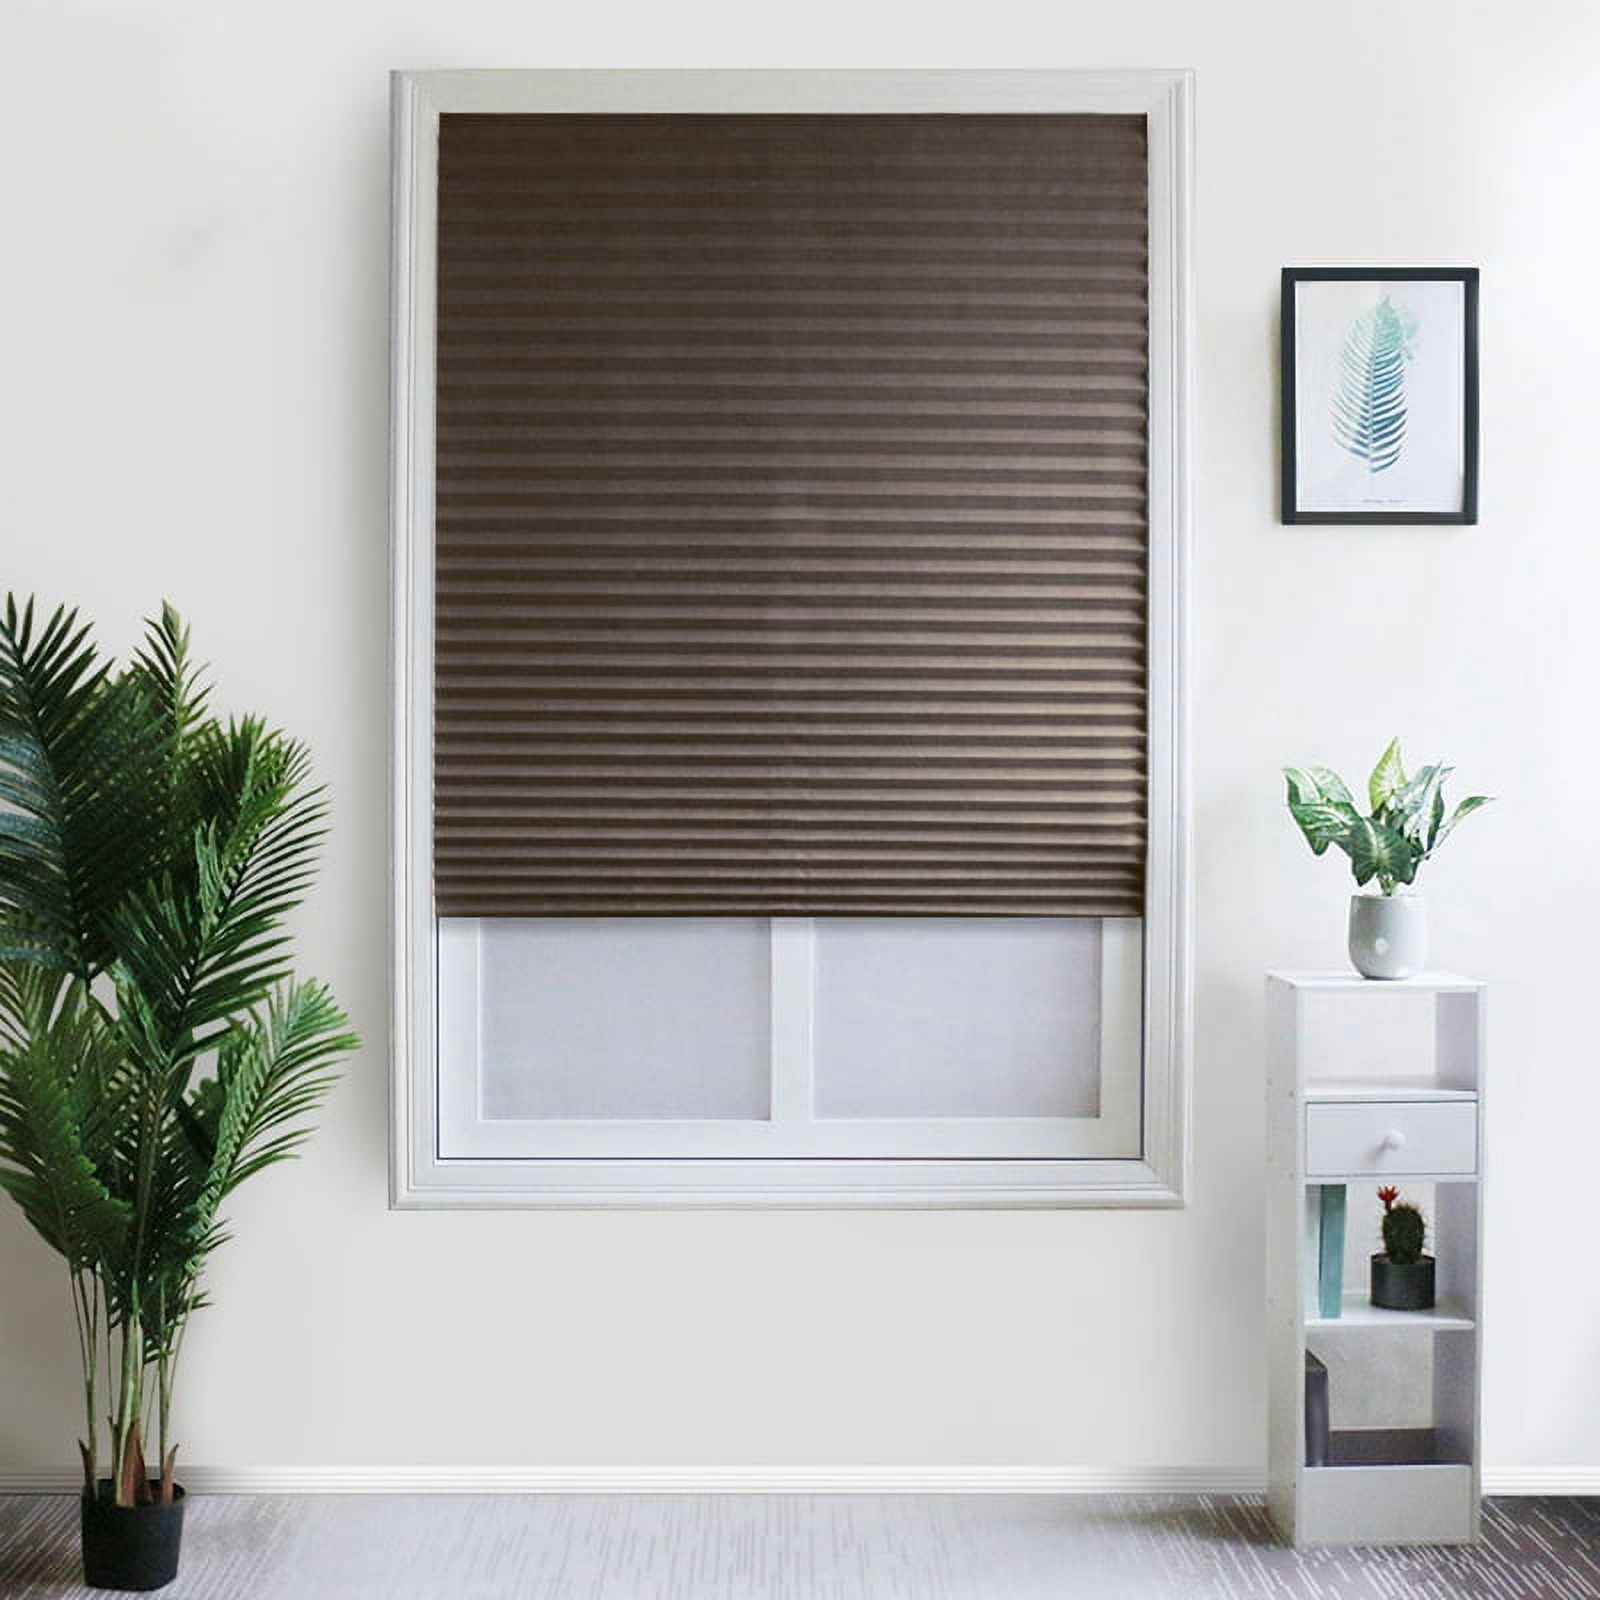  MYshade Blackout Roller Shades for Indoor Windows, Cordless  Roller Window Shades for Door, Roll Up Room Darkening Window Blinds for  Home and Office Easy to Install 31 inch Wide, 72 inch